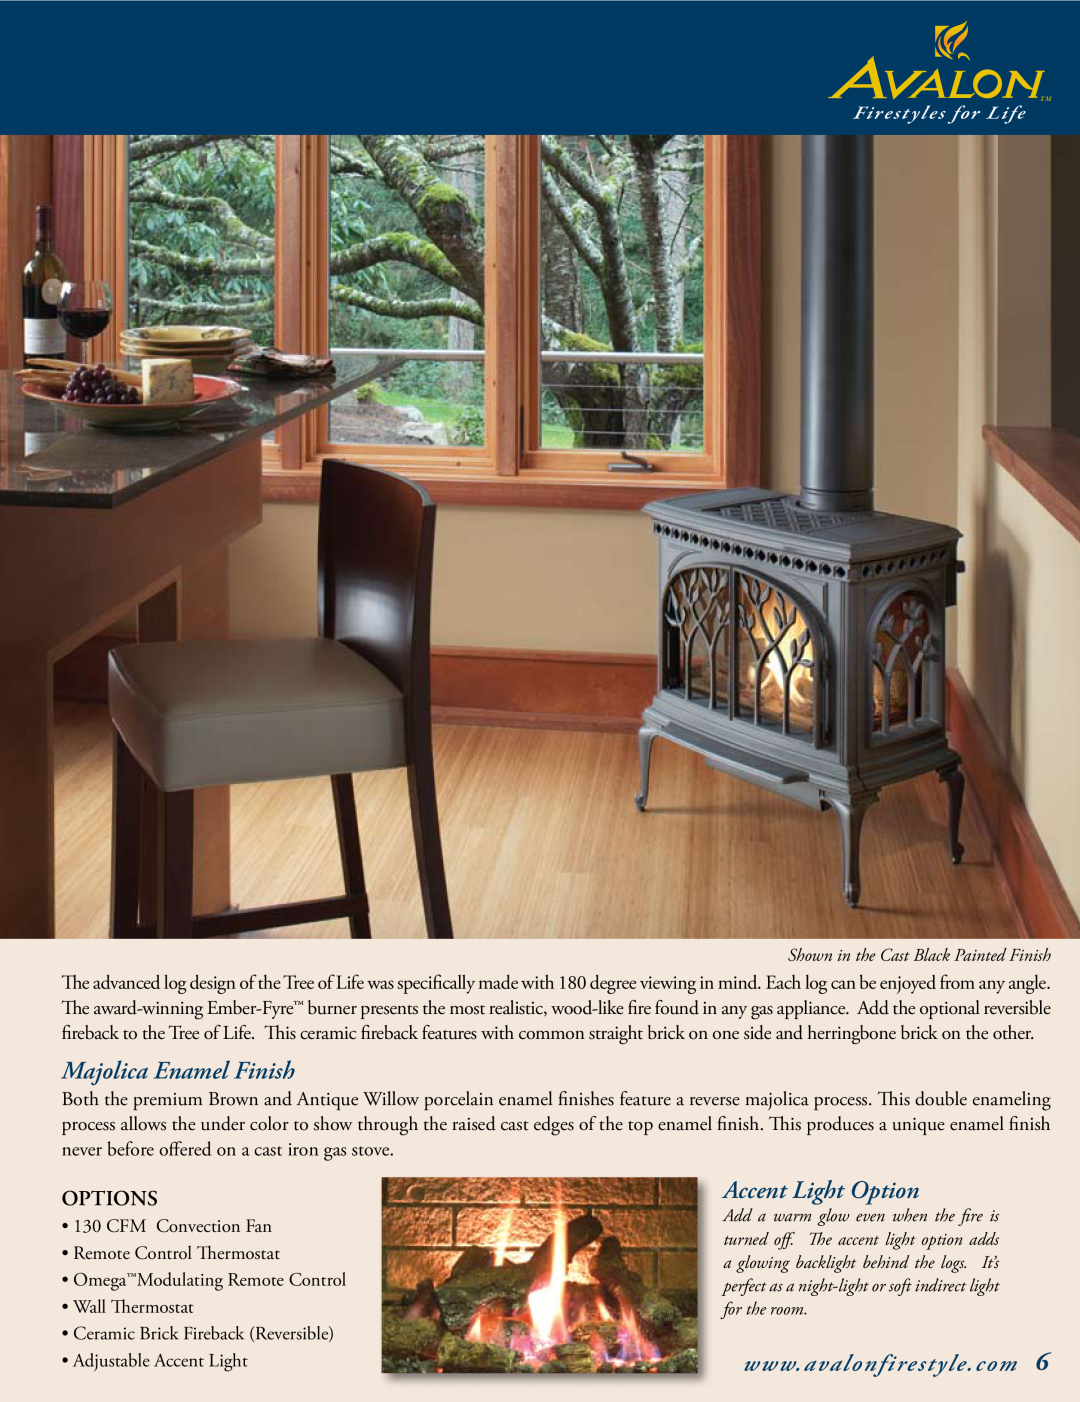 Avalon Stoves Gas Stove & Fireplace manual Majolica Enamel Finish, Accent Light Option, Options, Firestyles for Life 